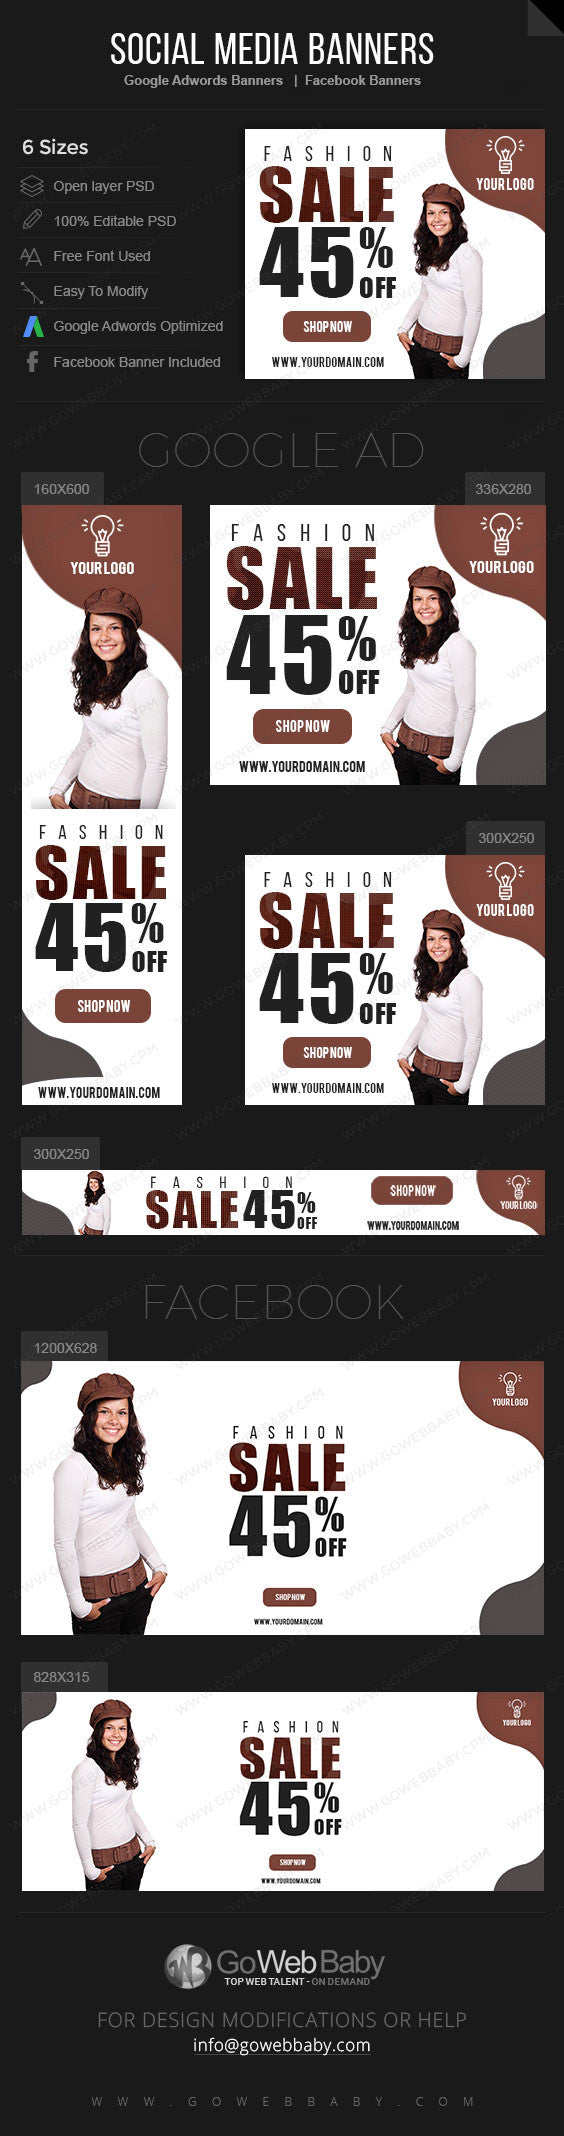 Google Adwords Display Banner with Facebook banners -Sale  Website Marketing - GoWebBaby.Com